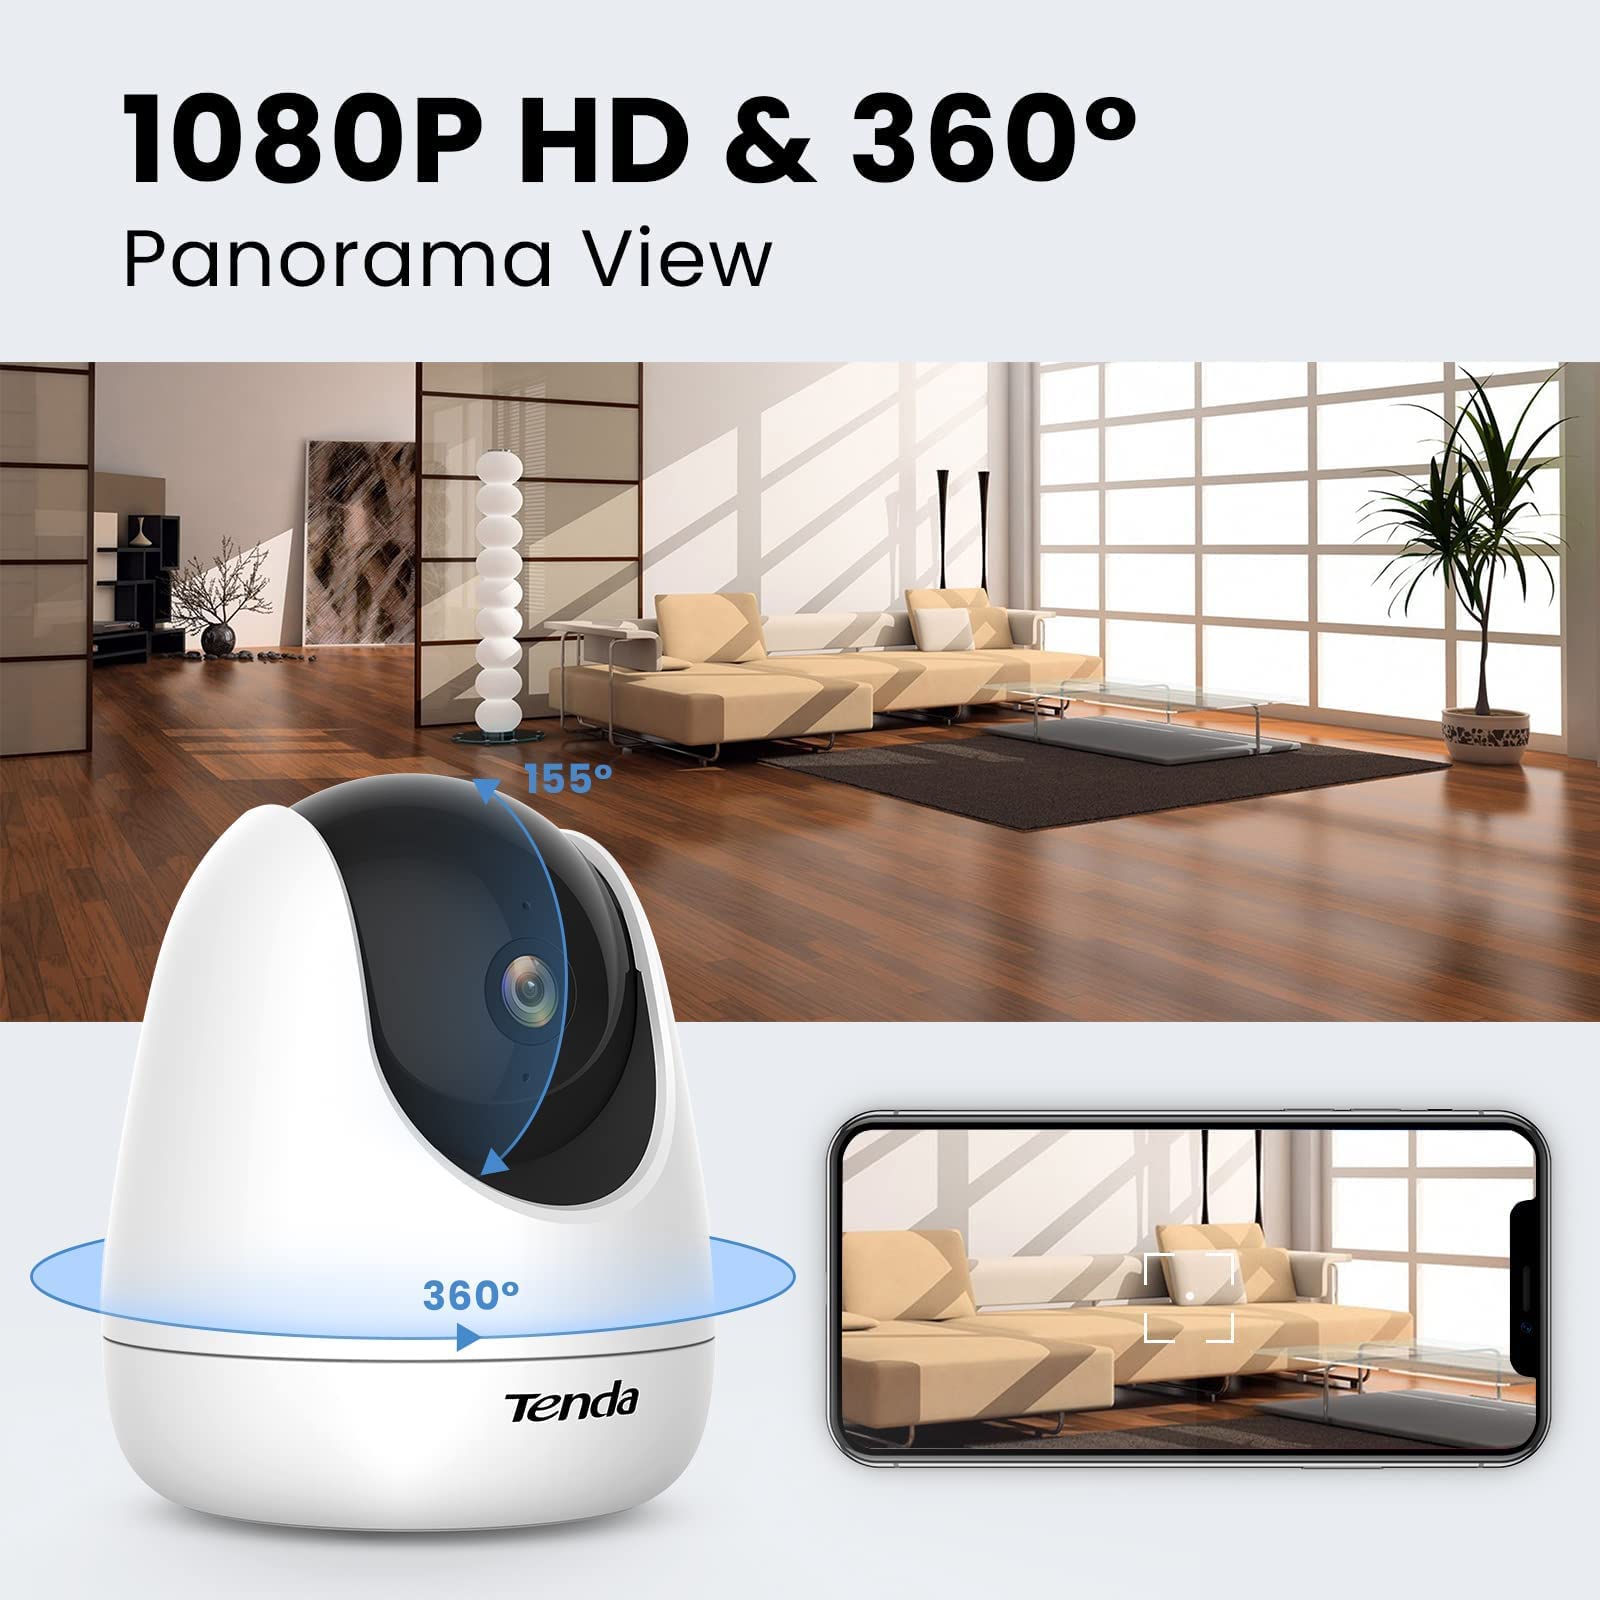 Tenda Pan/Tilt Indoor WiFi Camera,1080P Pet Dog Camera,360° Home Security Camera,Auto Tracking/Sound&Light Siren/Night Vision/2-Way Audio/Human&Motion Detection/Privacy Mode/SD&Cloud Storage(CP3)